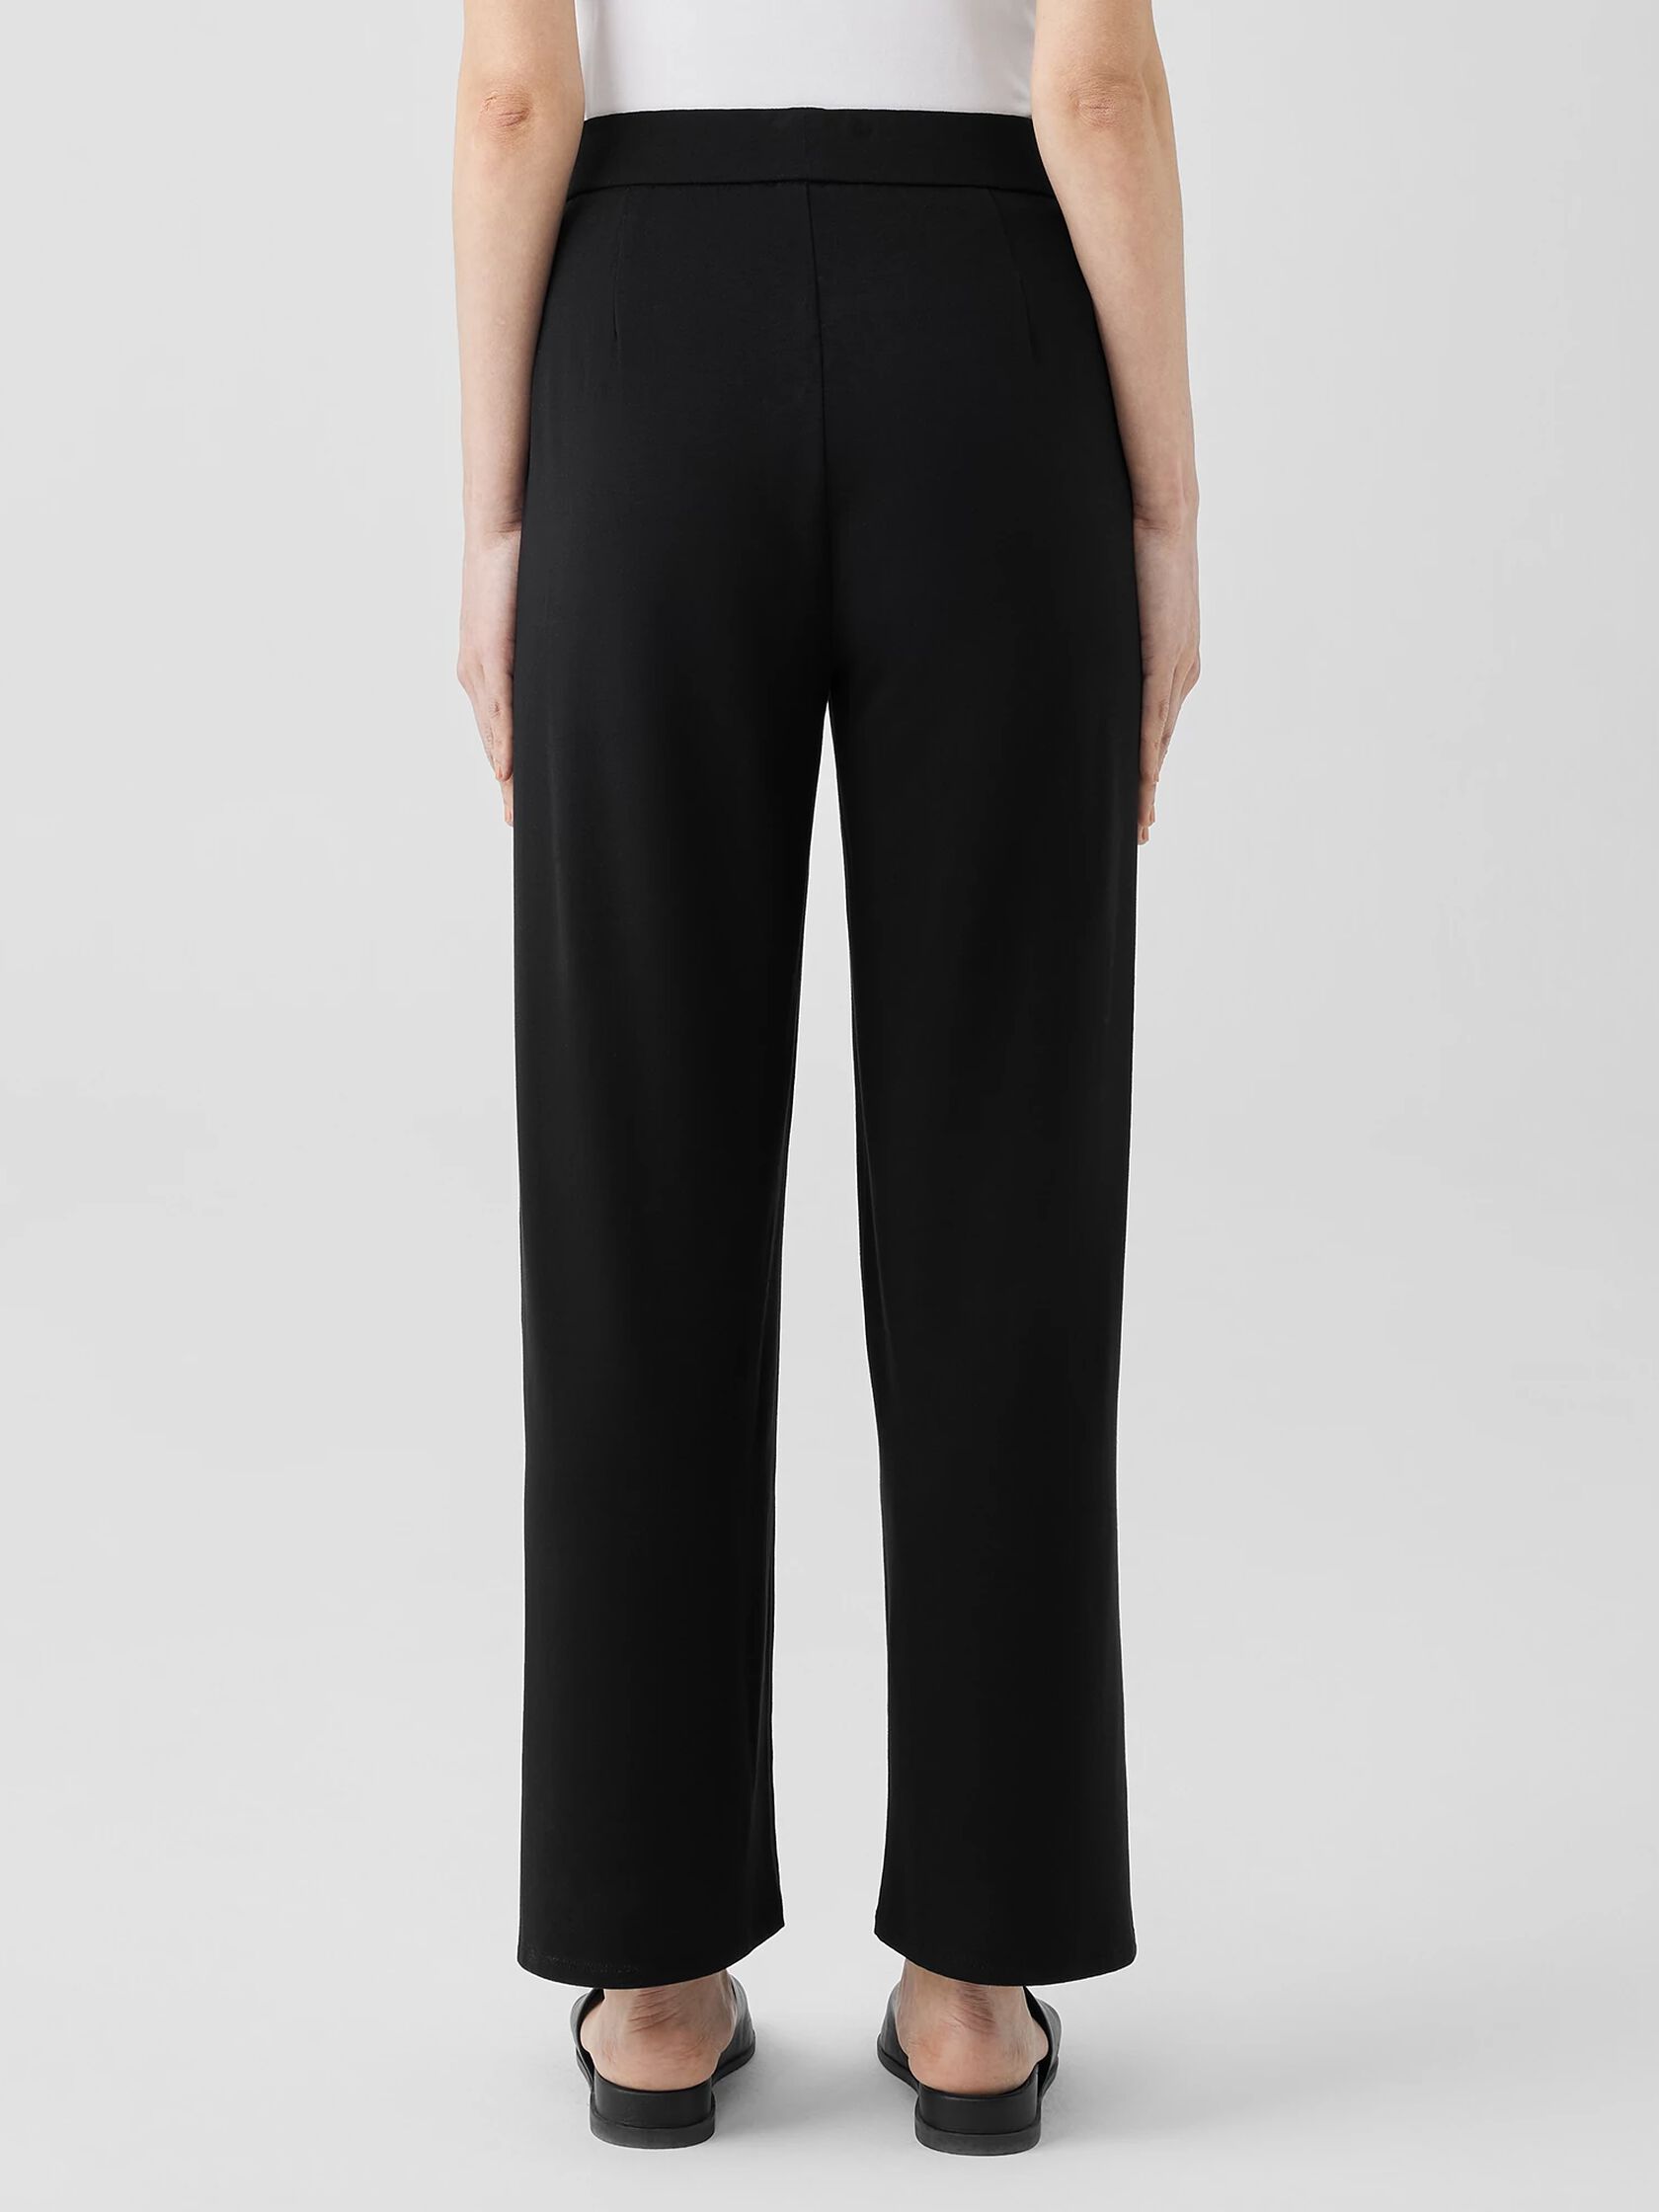 Stretch Jersey Knit Straight Pant | EILEEN FISHER